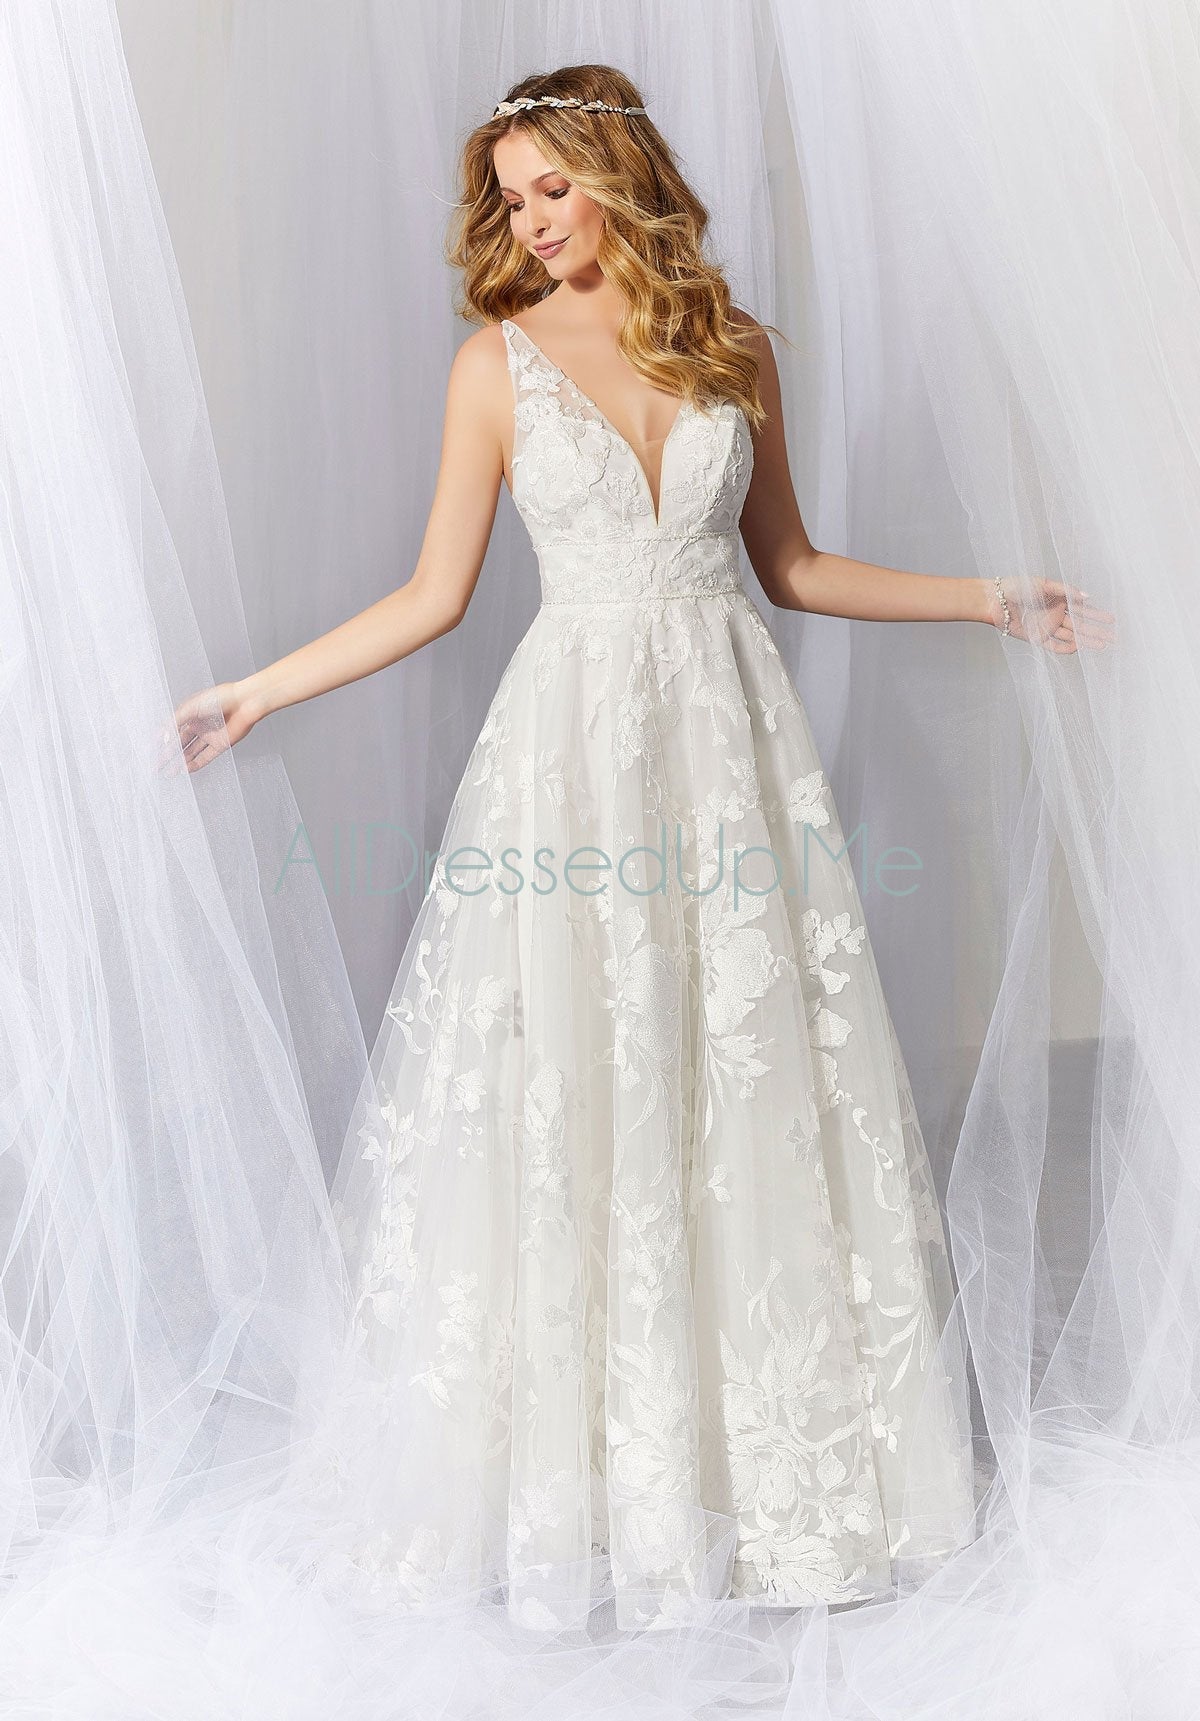 Last Dress In Store; Size: 16, Color: Ivory | Voyage - Alaina - 6932 - Cheron's Bridal & All Dressed Up Prom - 16 - Wedding Gowns Dresses Chattanooga Hixson Shops Boutiques Tennessee TN Georgia GA MSRP Lowest Prices Sale Discount